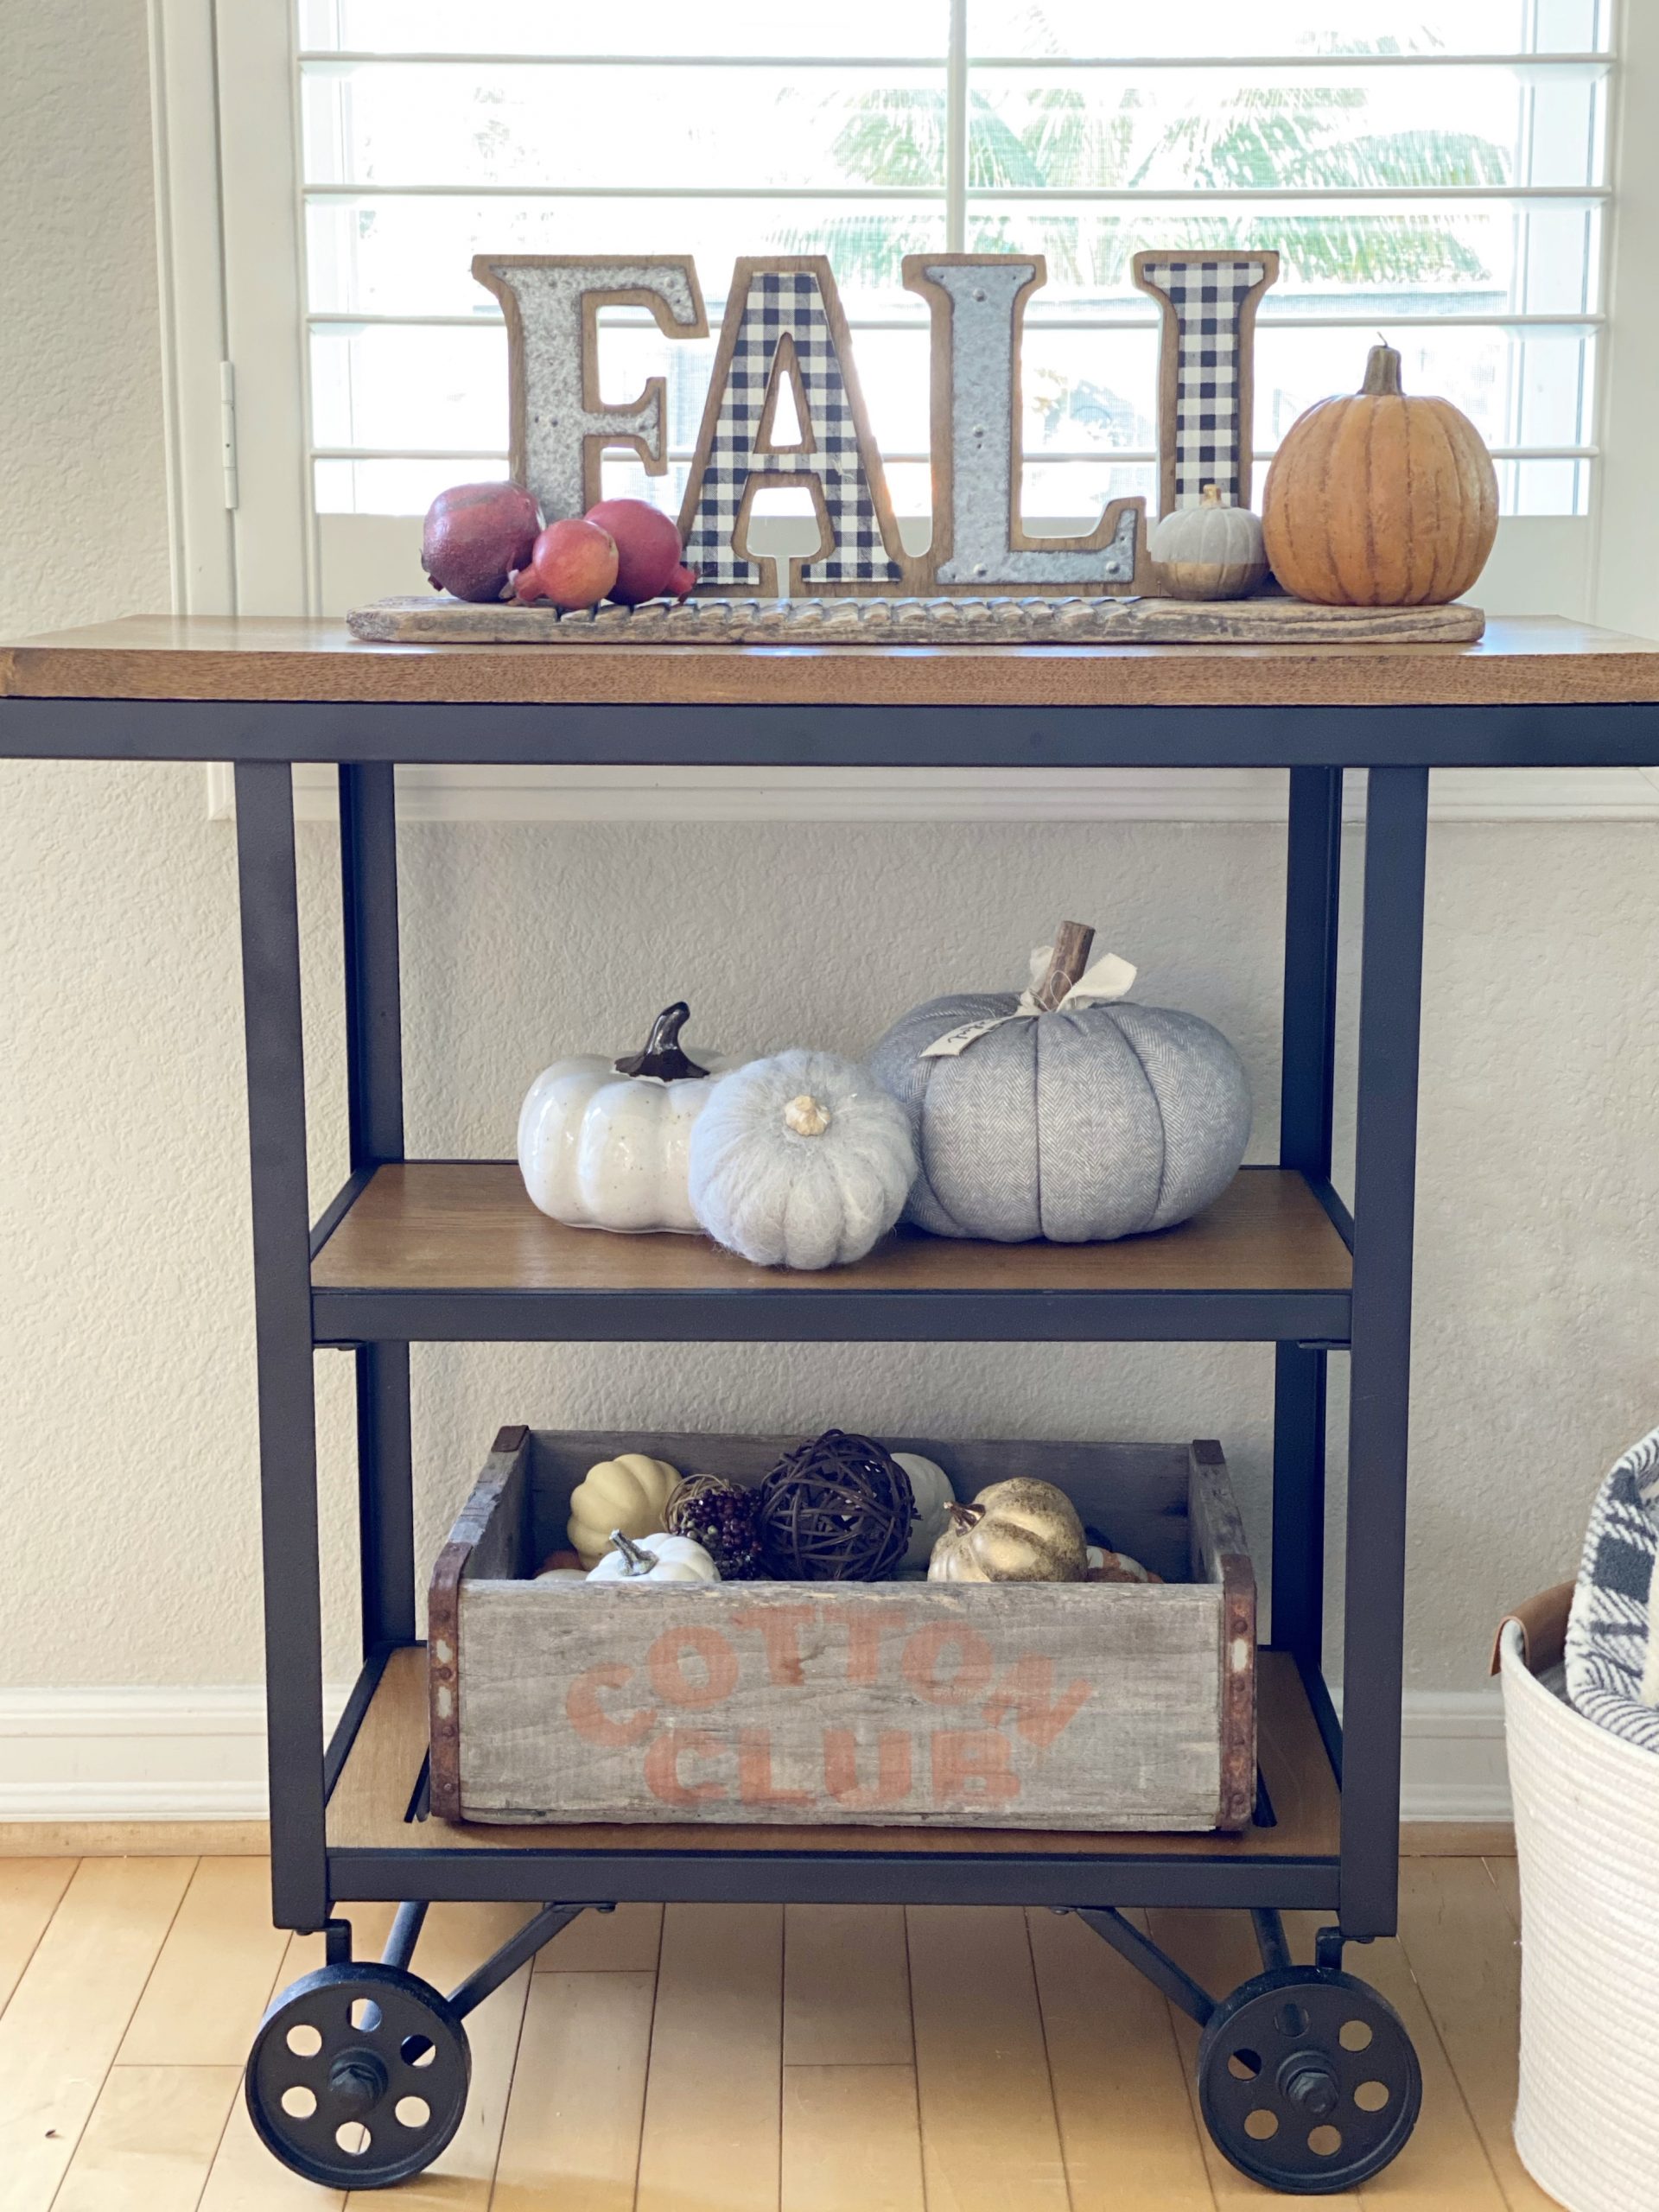 Want to Know What my Six Favorite Fall Candles Are?